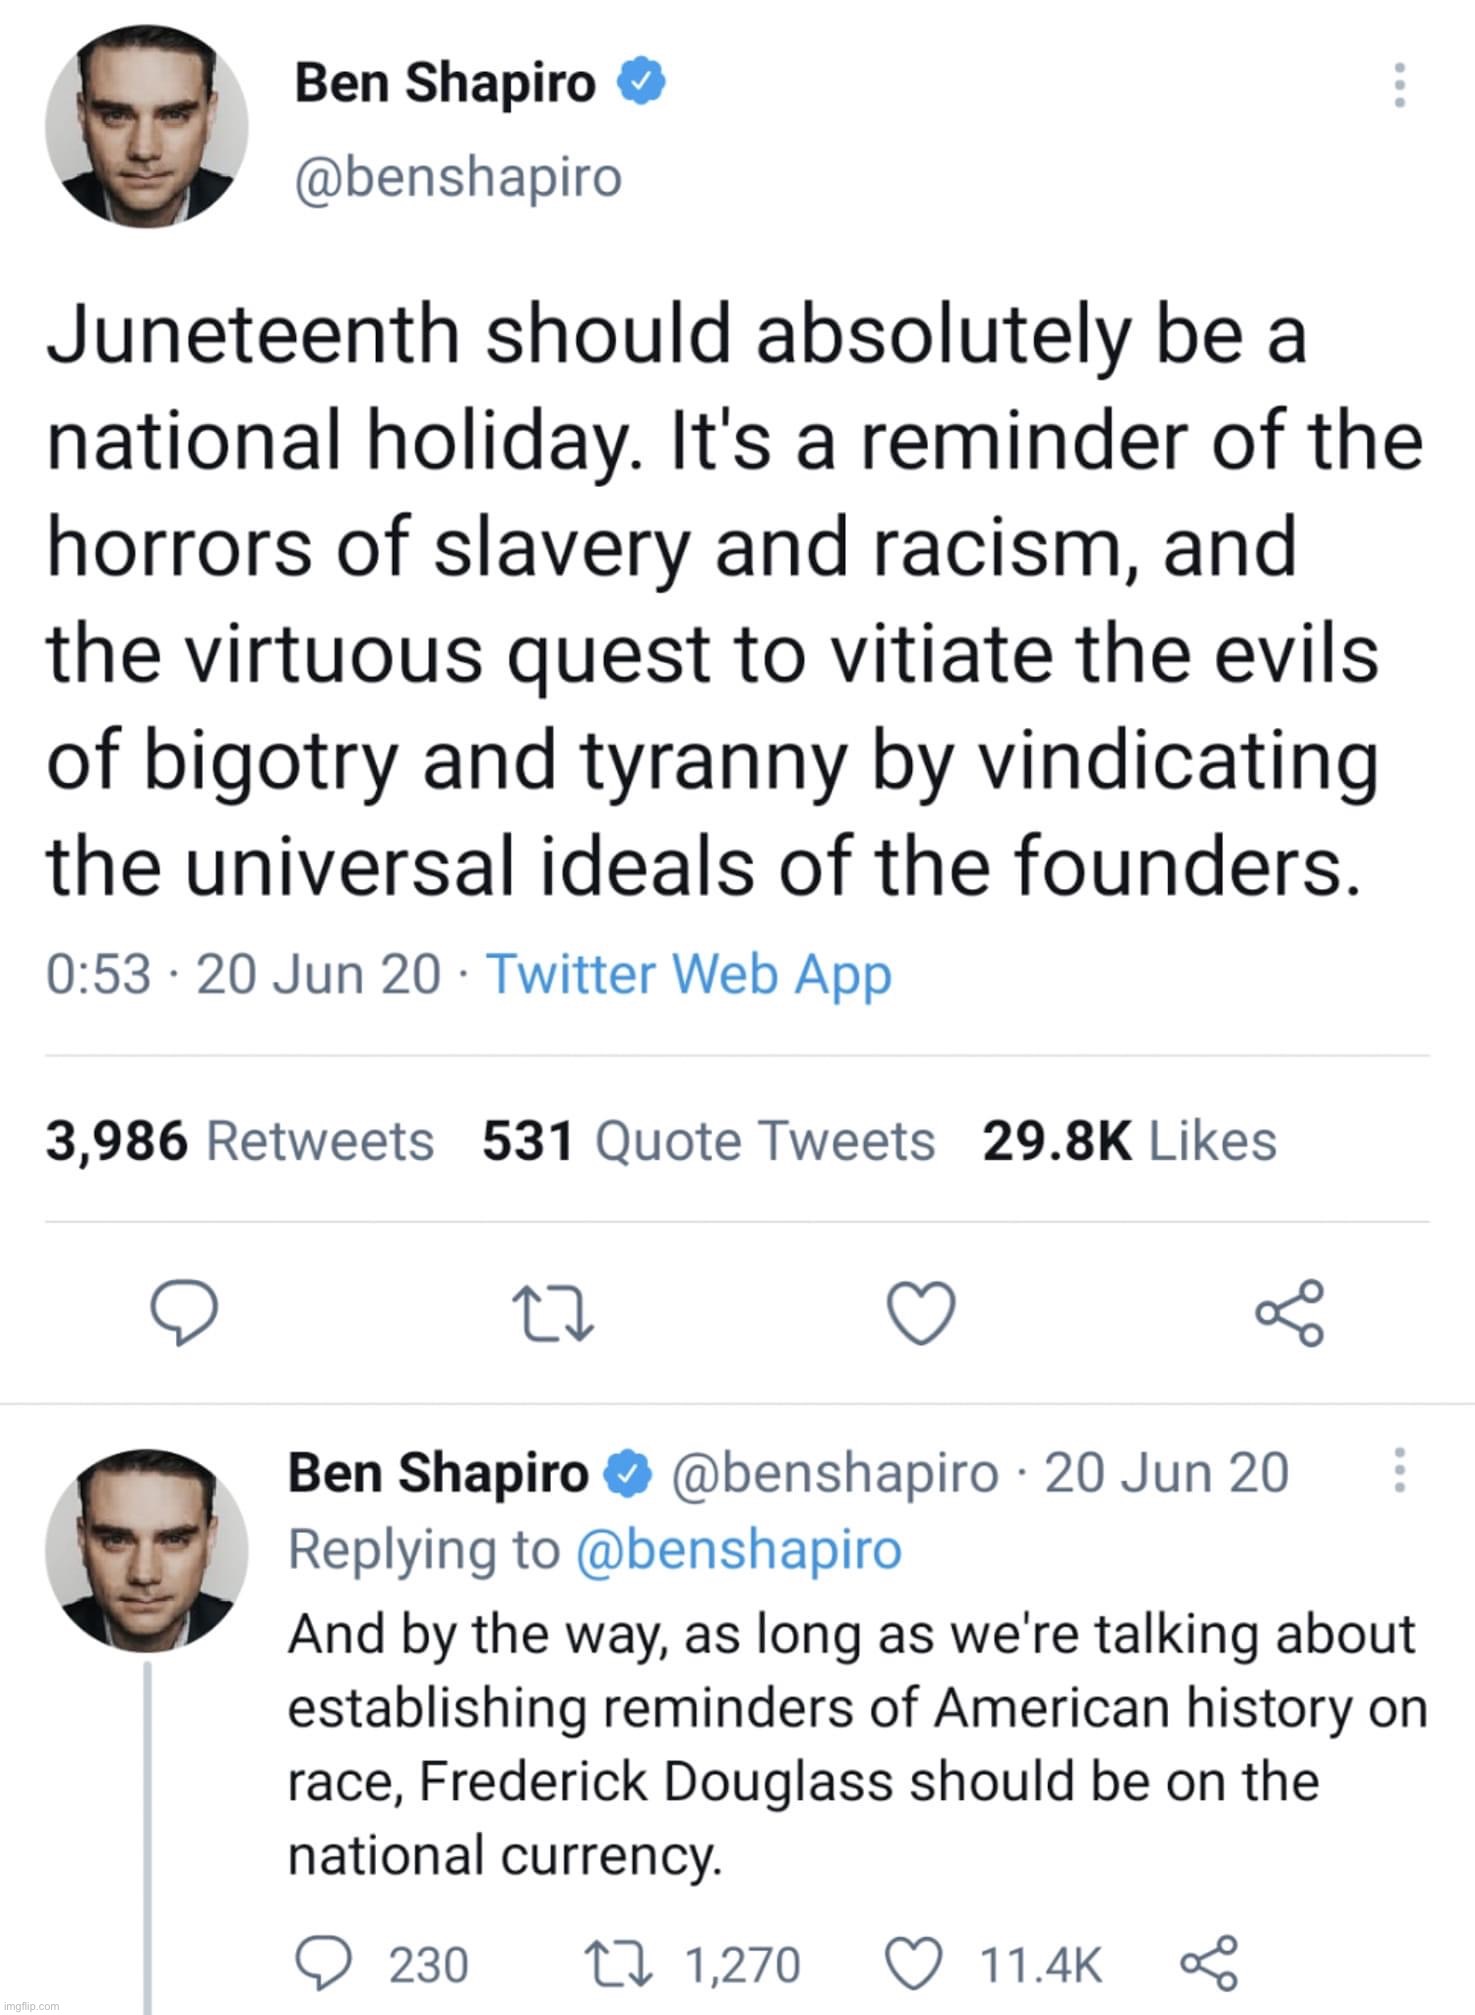 ben would have made it a holiday last year, take that leftists, maga | image tagged in ben shapiro juneteenth,leftists,maga,ben shapiro,racism,twitter | made w/ Imgflip meme maker